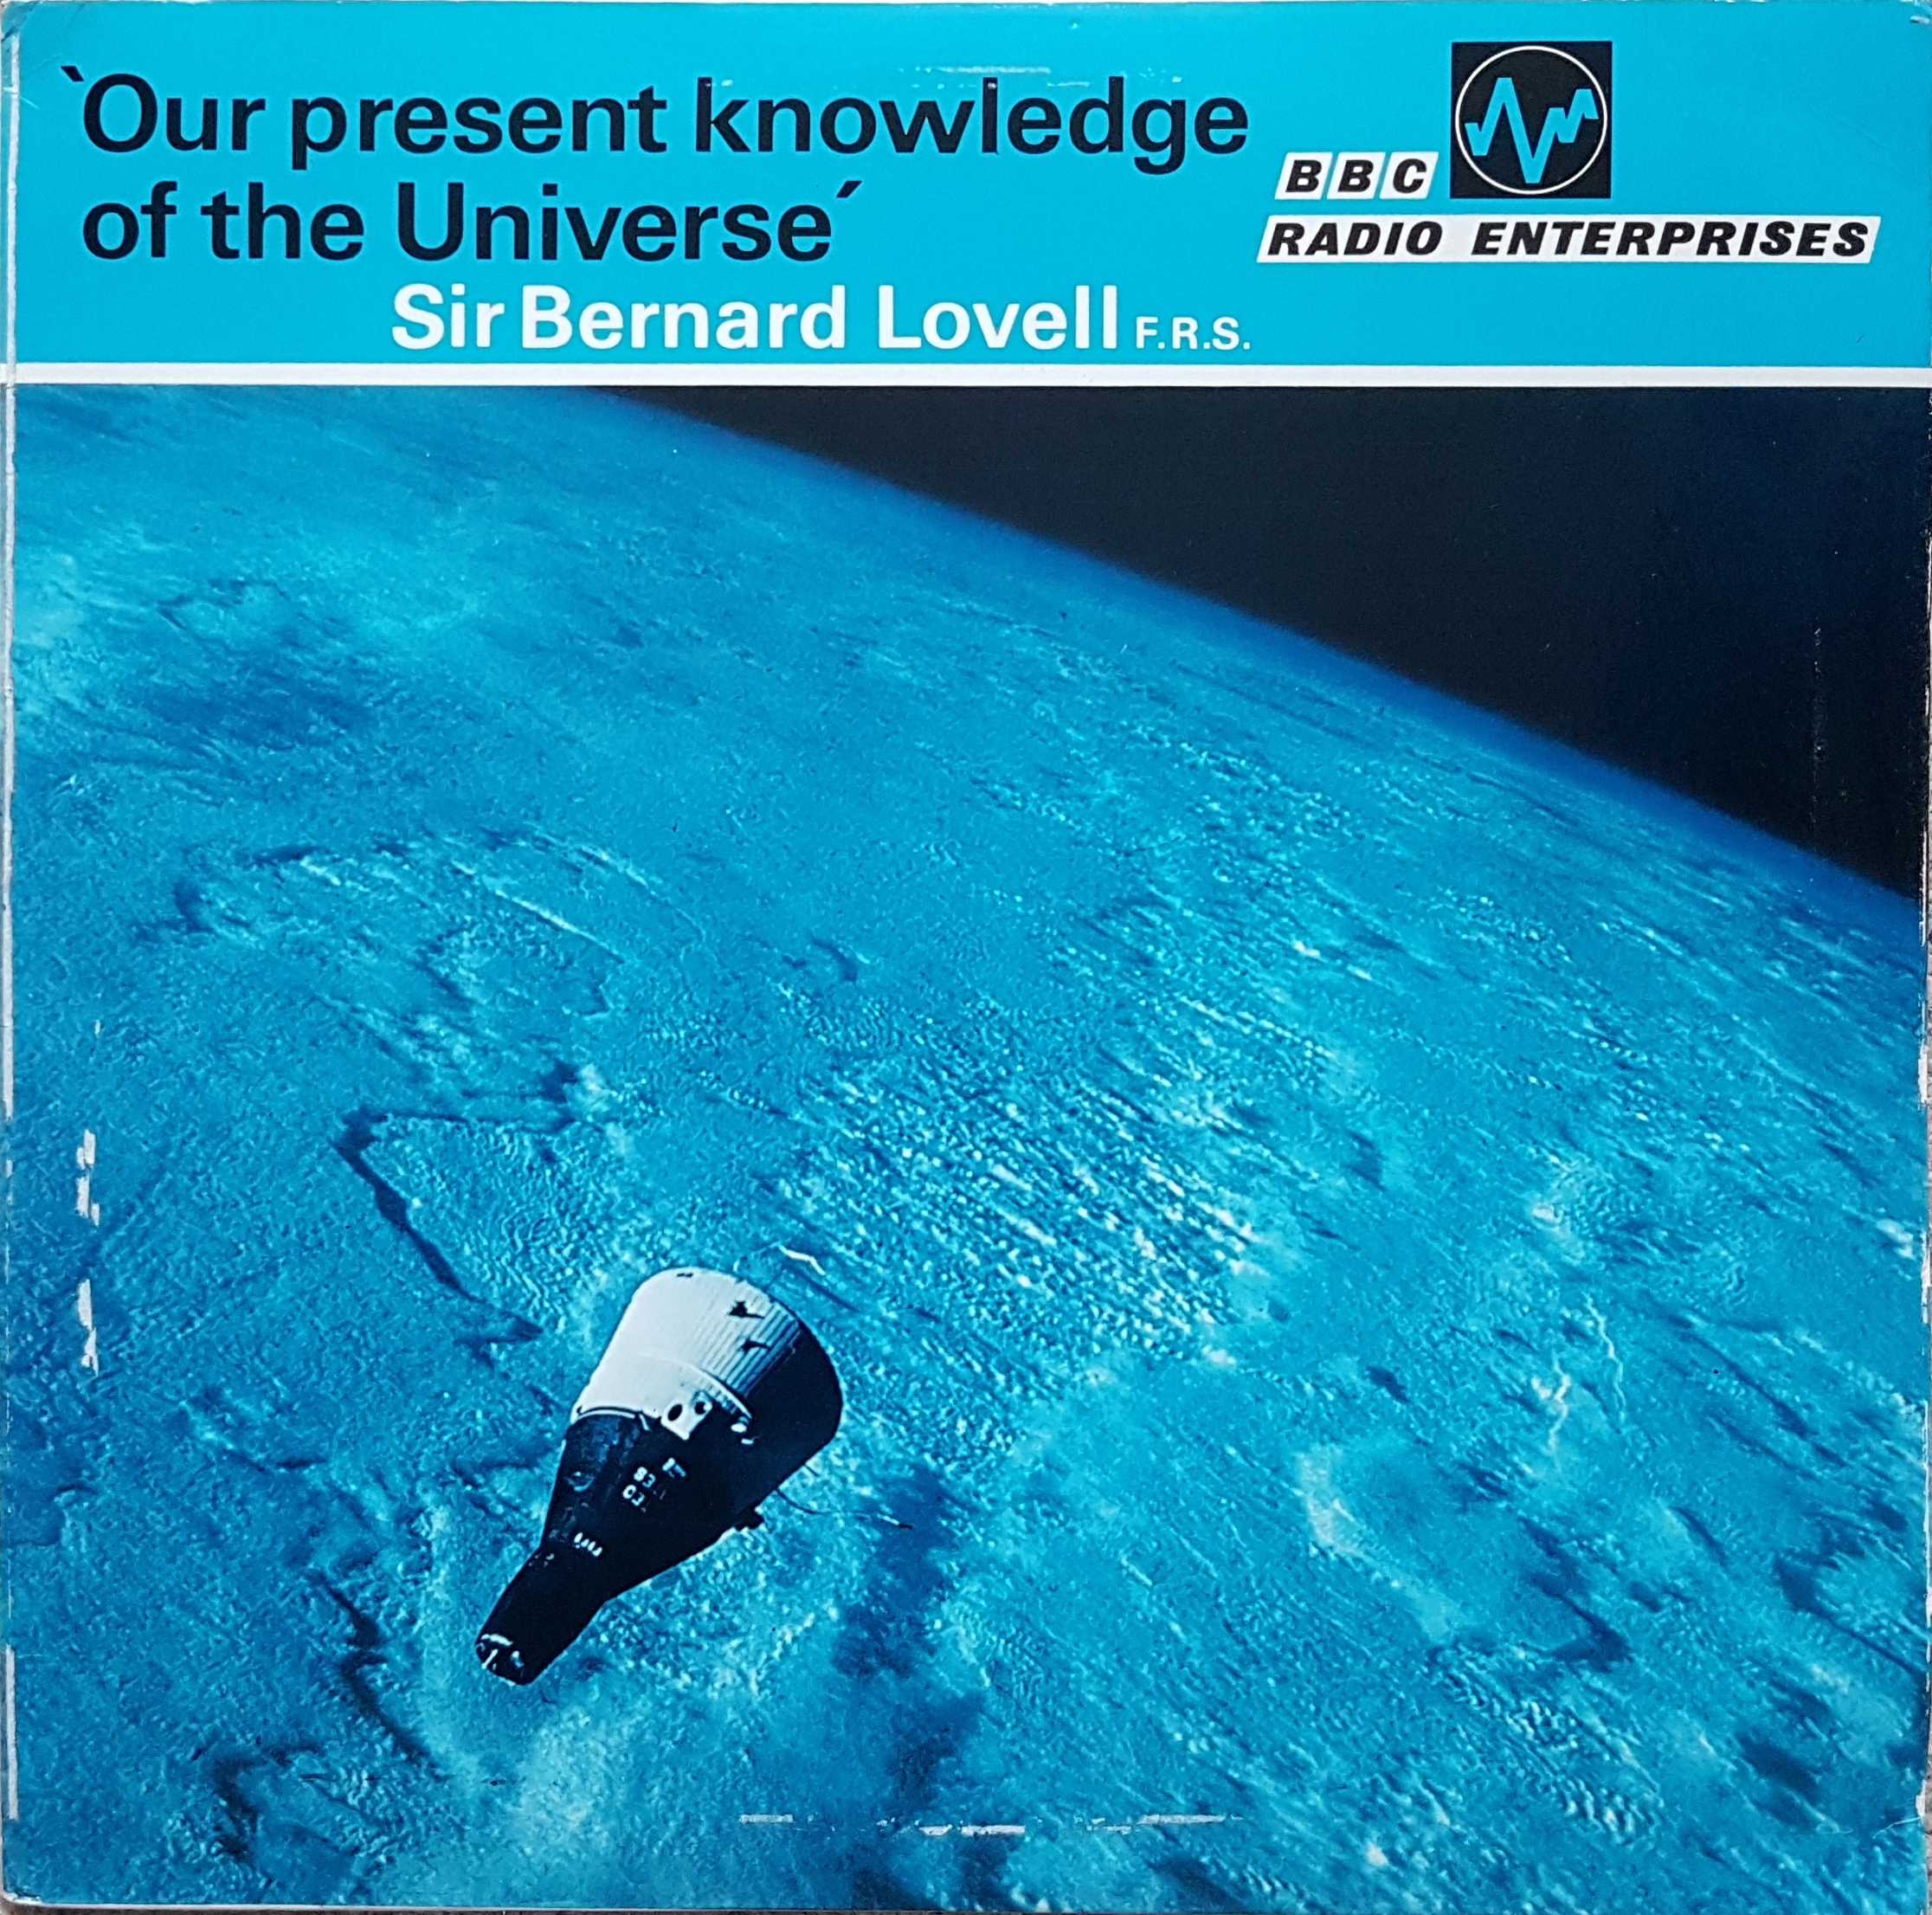 Picture of Our present knowledge of the Universe by artist Sir Bernard Lovell from the BBC albums - Records and Tapes library